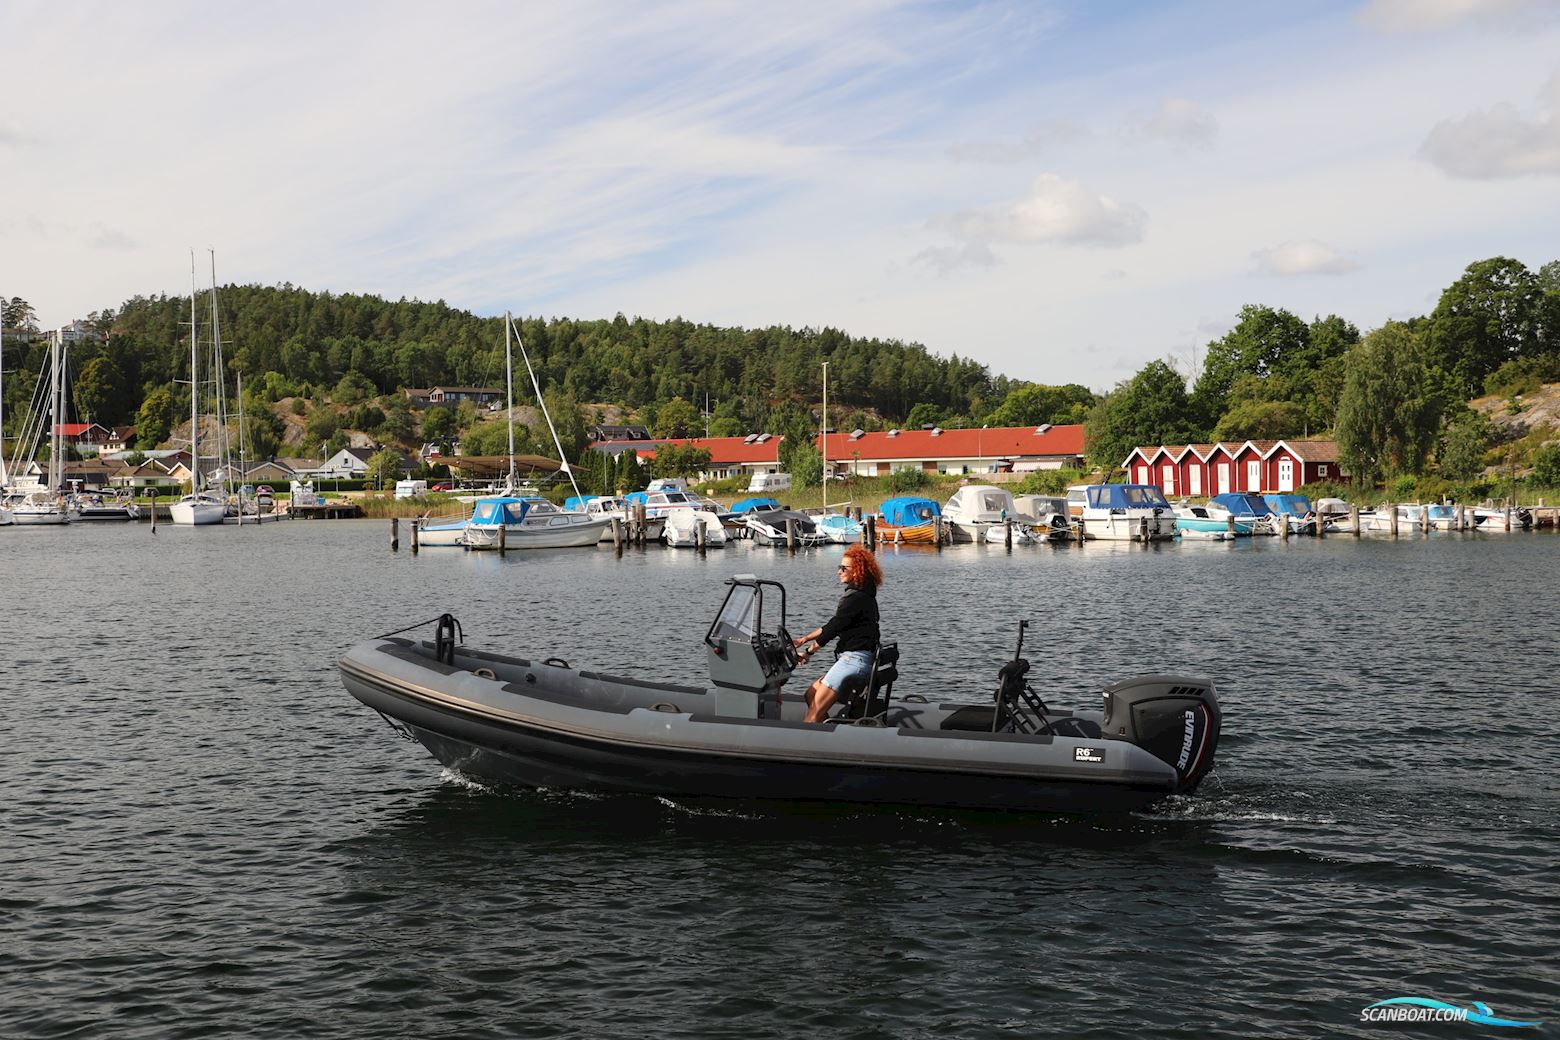 Rupert R6 Inflatable / Rib 2020, with Evinrude E-Tec 150hk engine, Sweden